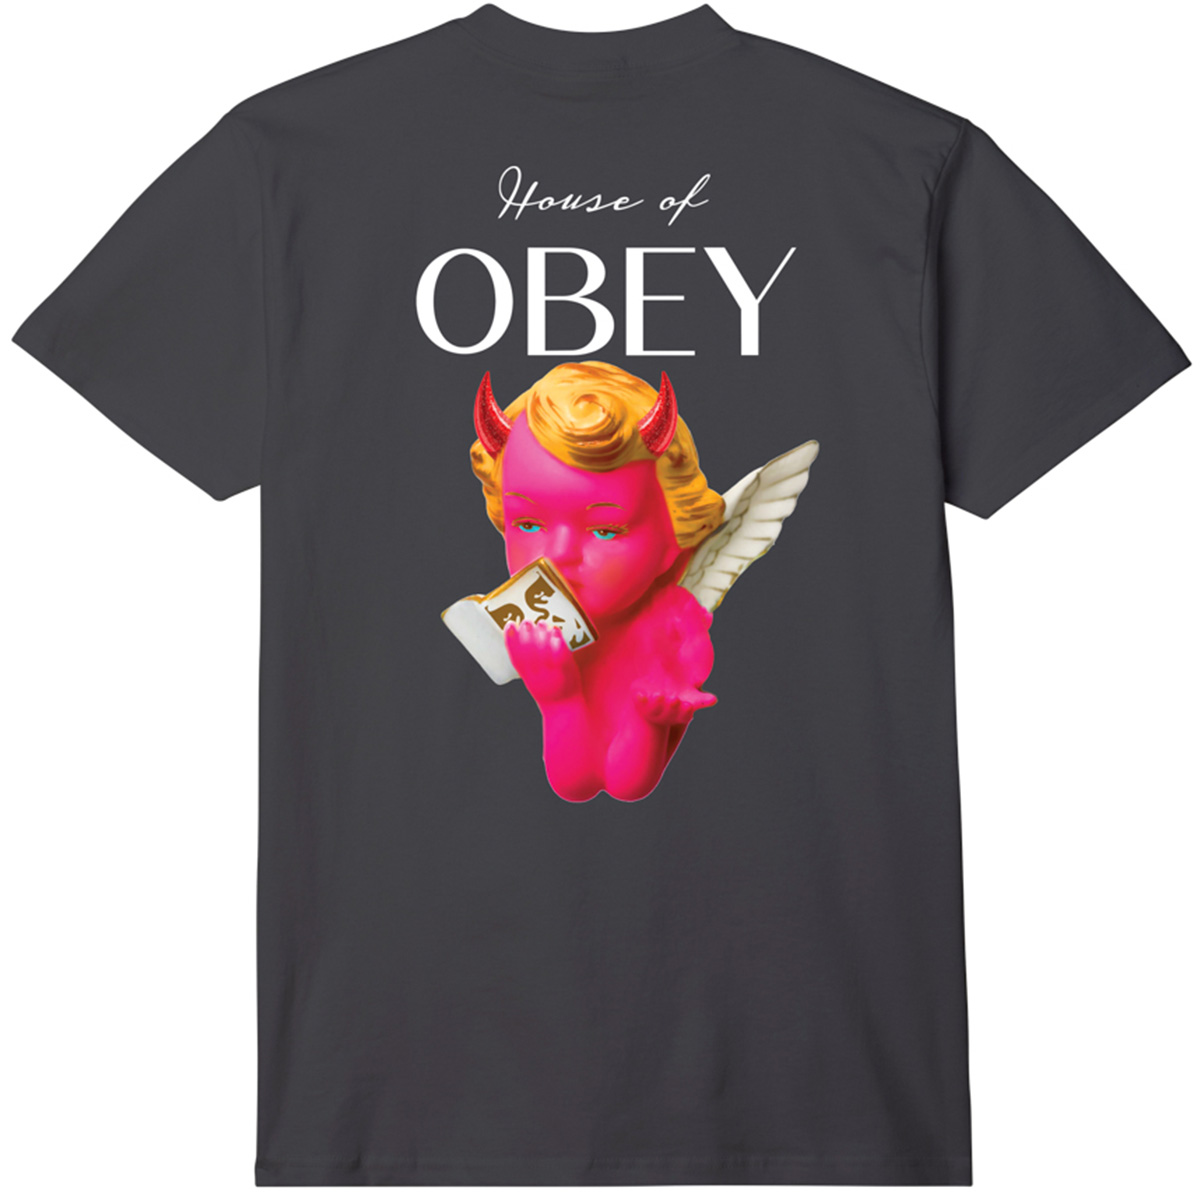 Obey House Of Obey T-Shirt Black